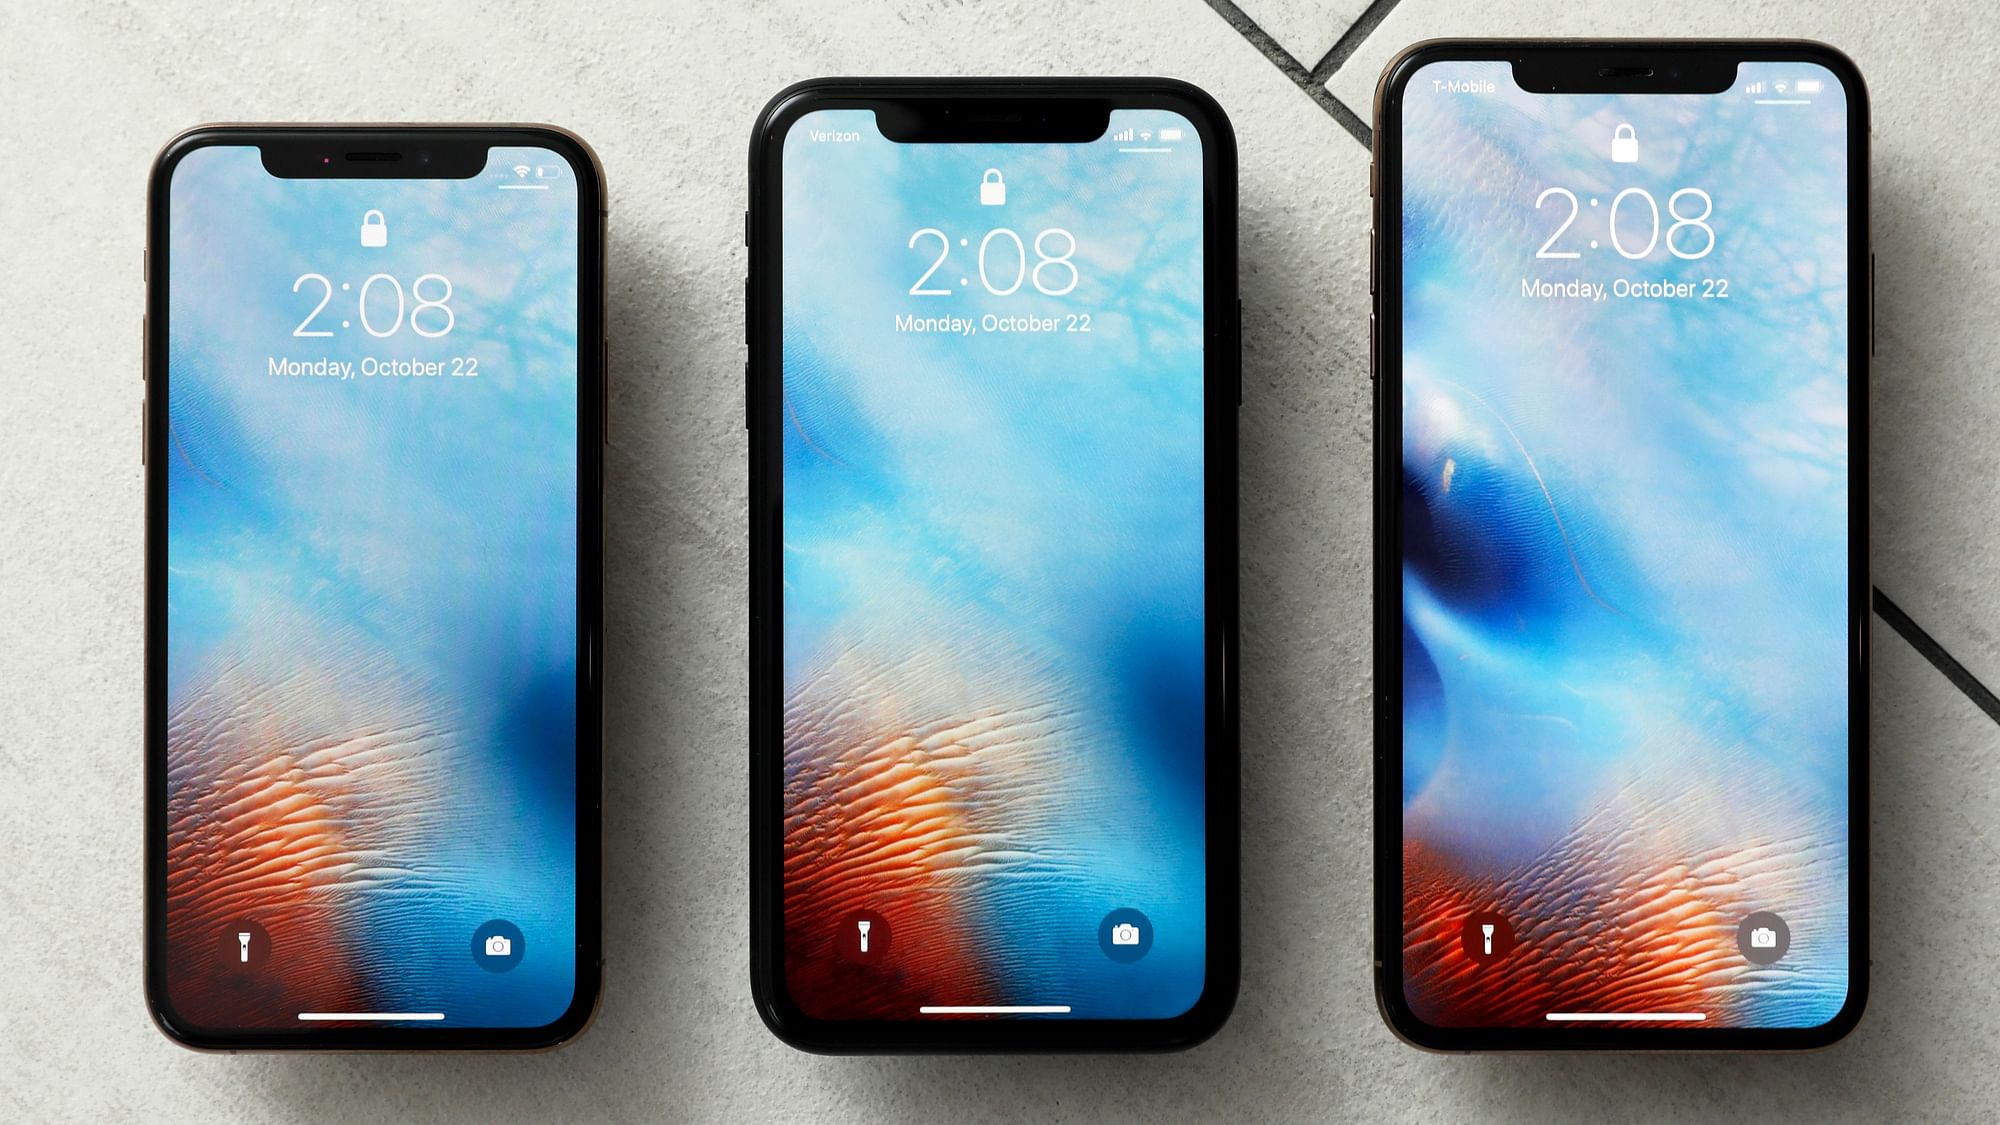 Apple acknowledged that demand for iPhones is waning, confirming investor fears that the company’s most profitable product has lost some of its lustre.&nbsp;